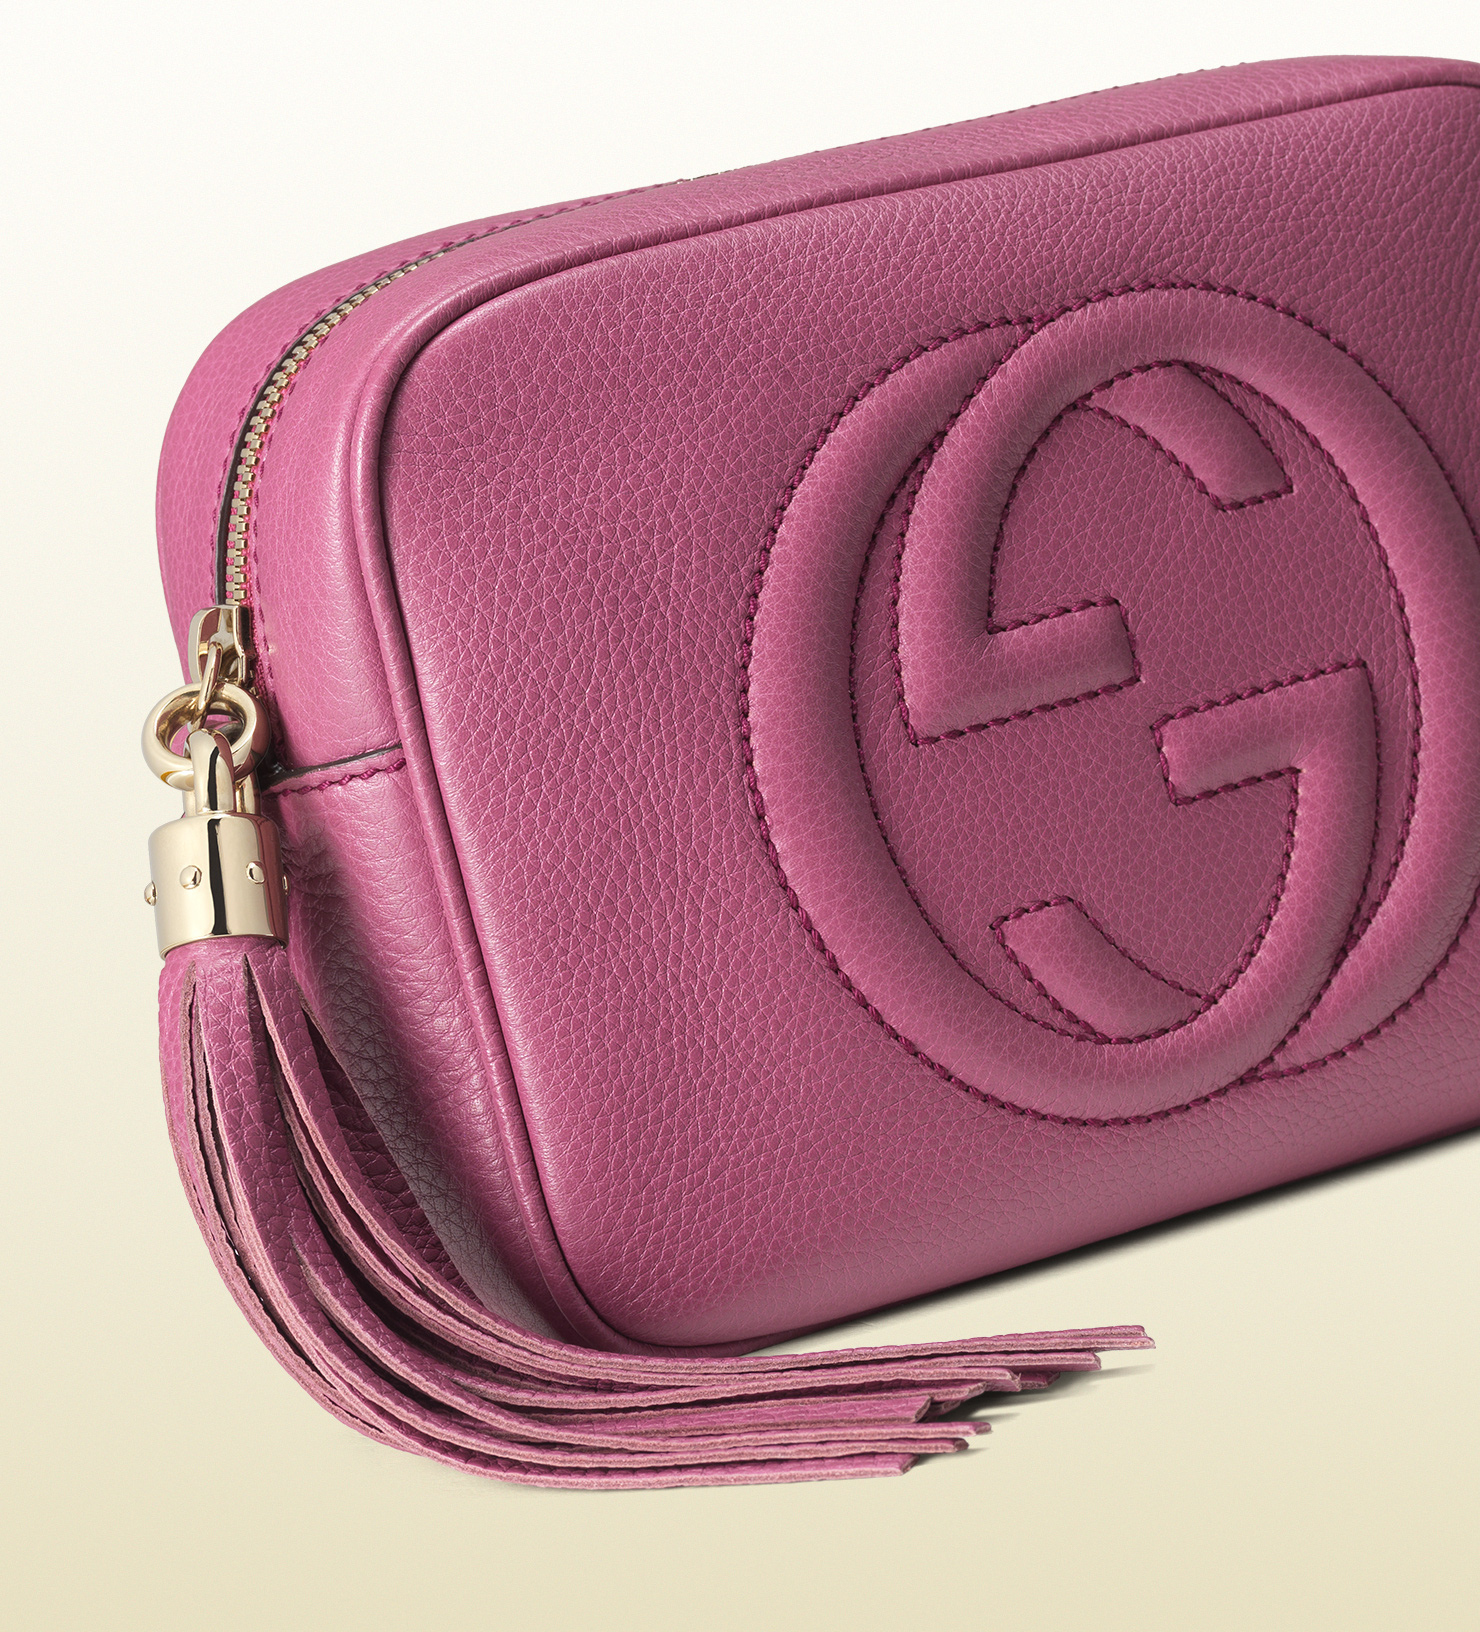 Gucci Soho Leather Disco Bag in Pink | Lyst